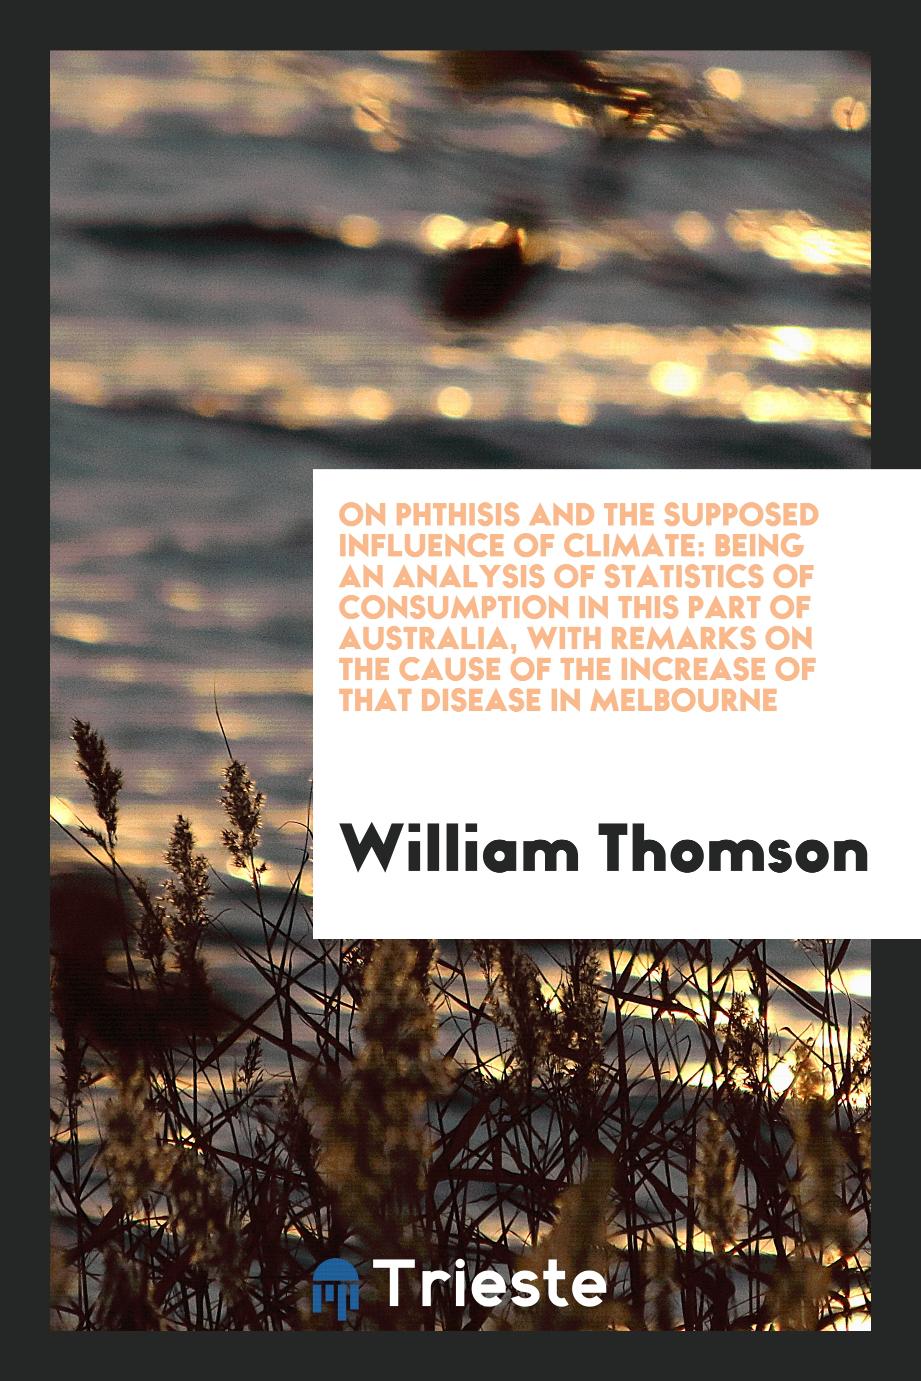 On Phthisis and the Supposed Influence of Climate: Being an Analysis of Statistics of Consumption in This Part of Australia, with Remarks on the Cause of the Increase of That Disease in Melbourne